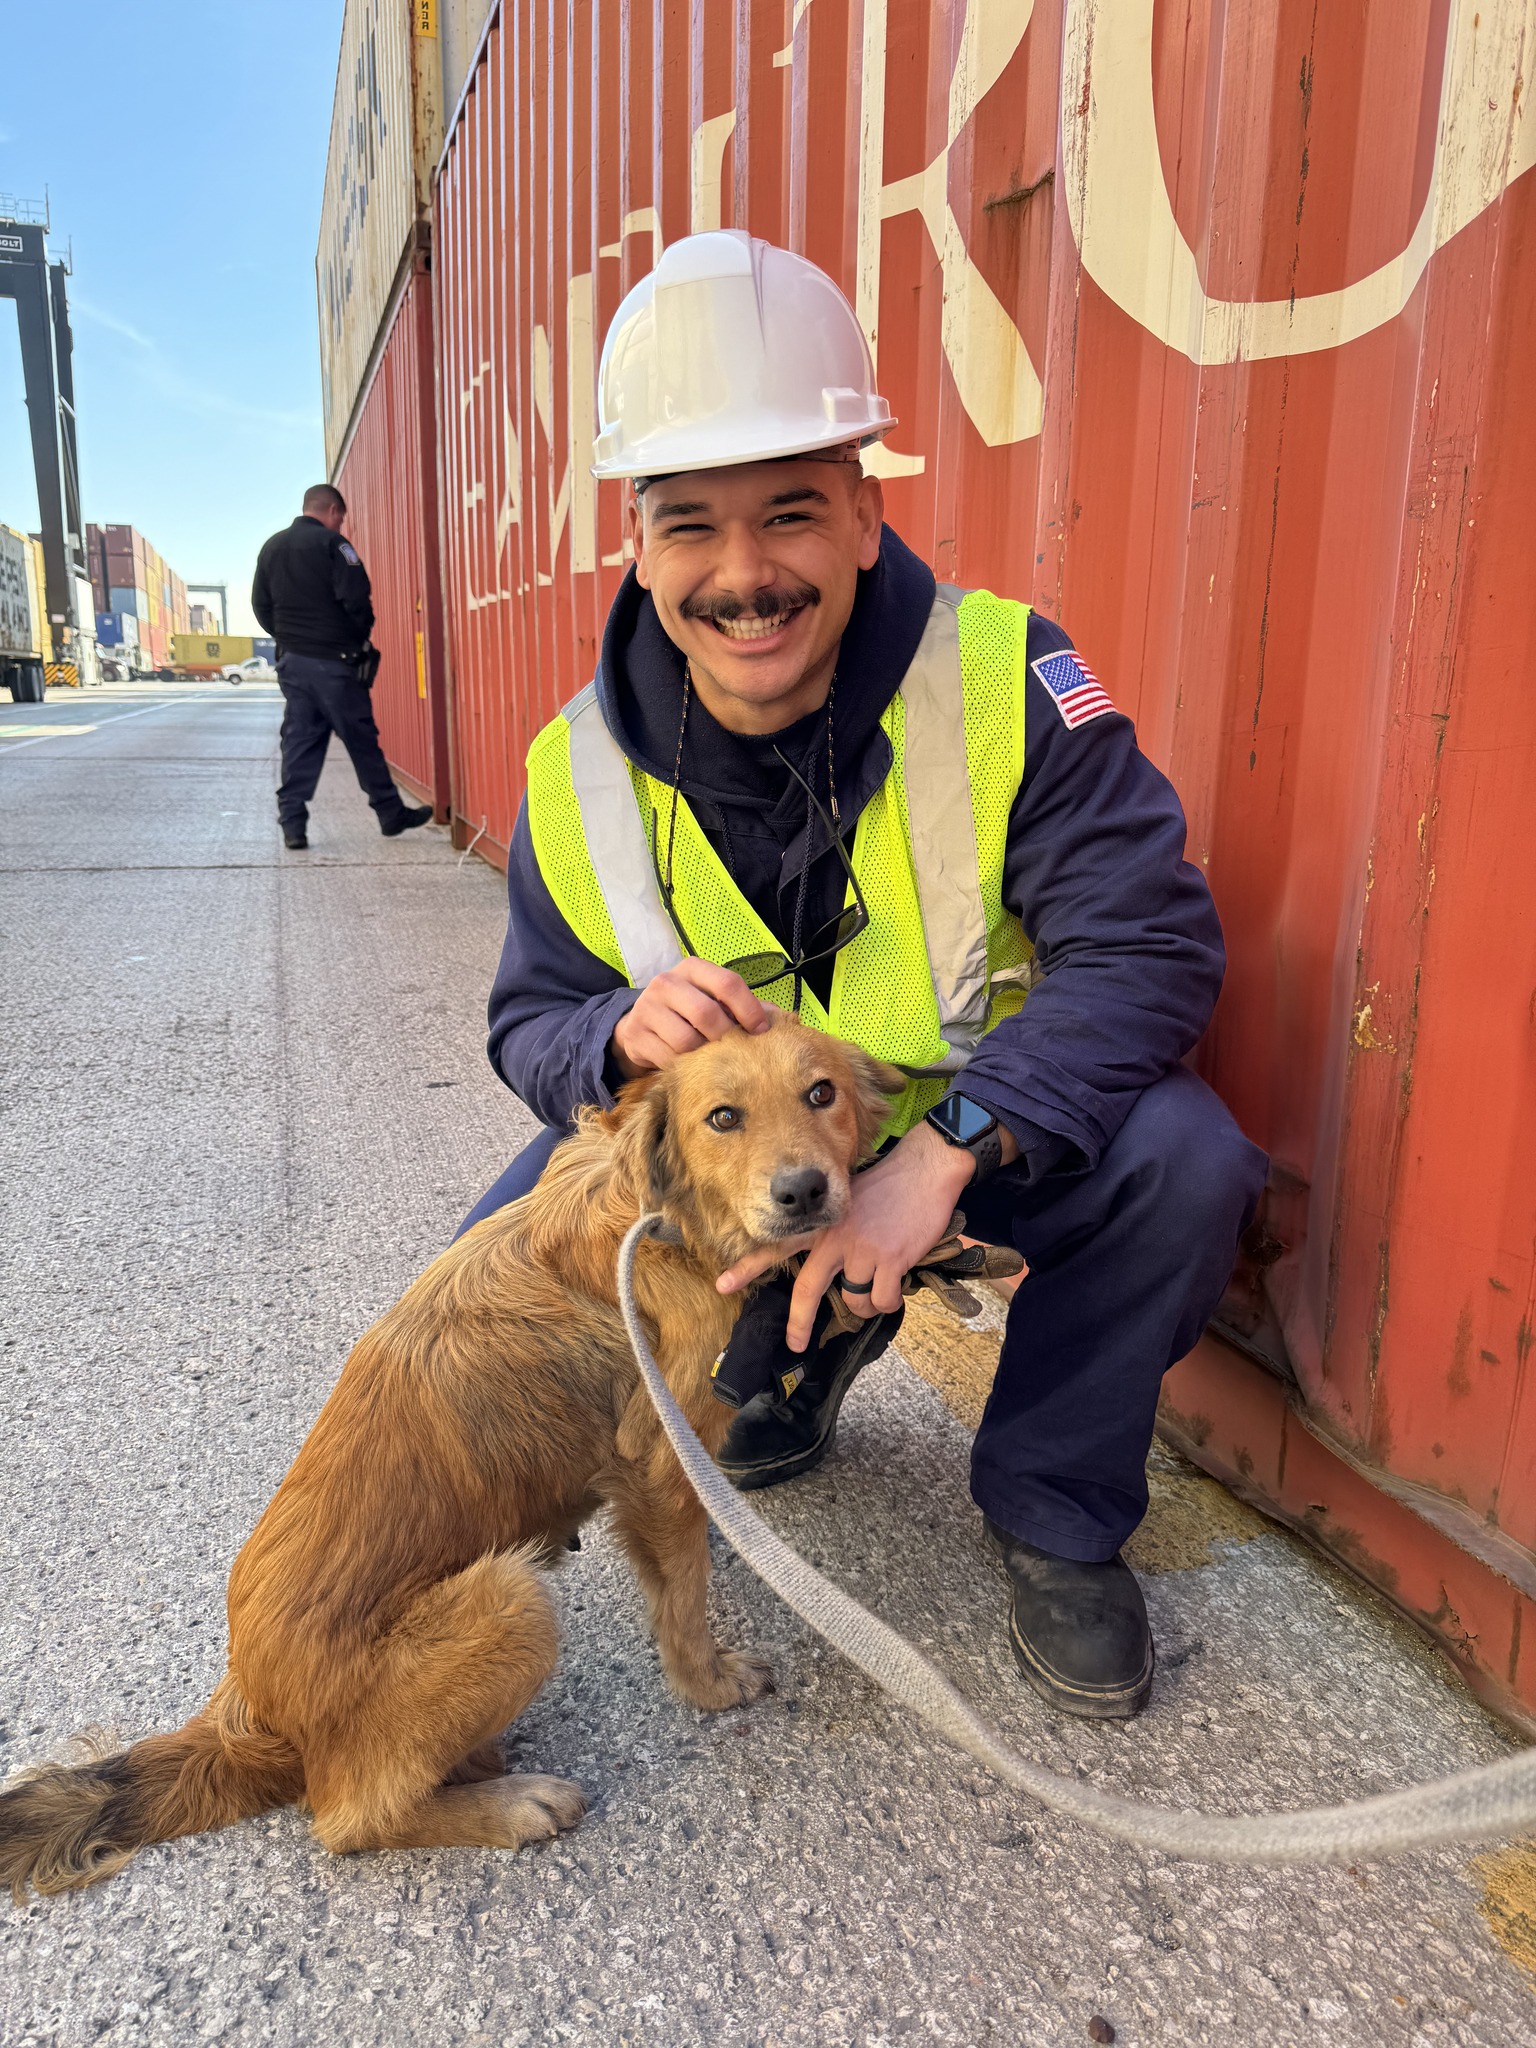 construction worker and dog